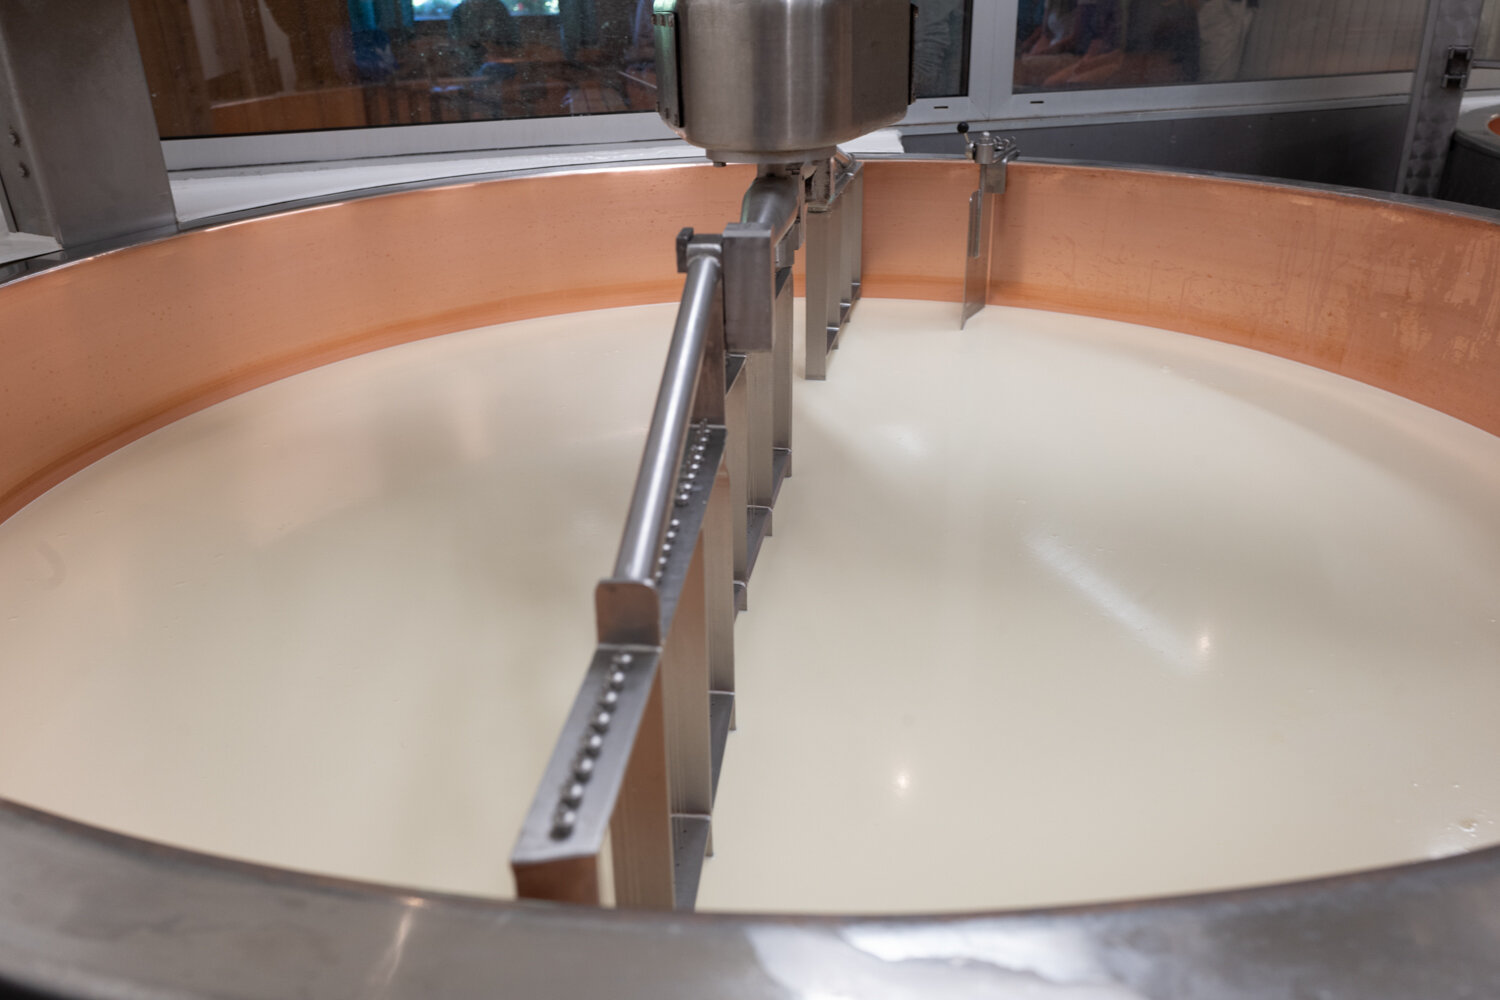  Alexis heats the milk in the copper cisterns, adds the rennet to get it curdle, heats again up to 54° the curd during 30 to 40 minutes to get the proper consistency basis for the cheese, that will be pressed during 24 hours before being soaked in sa